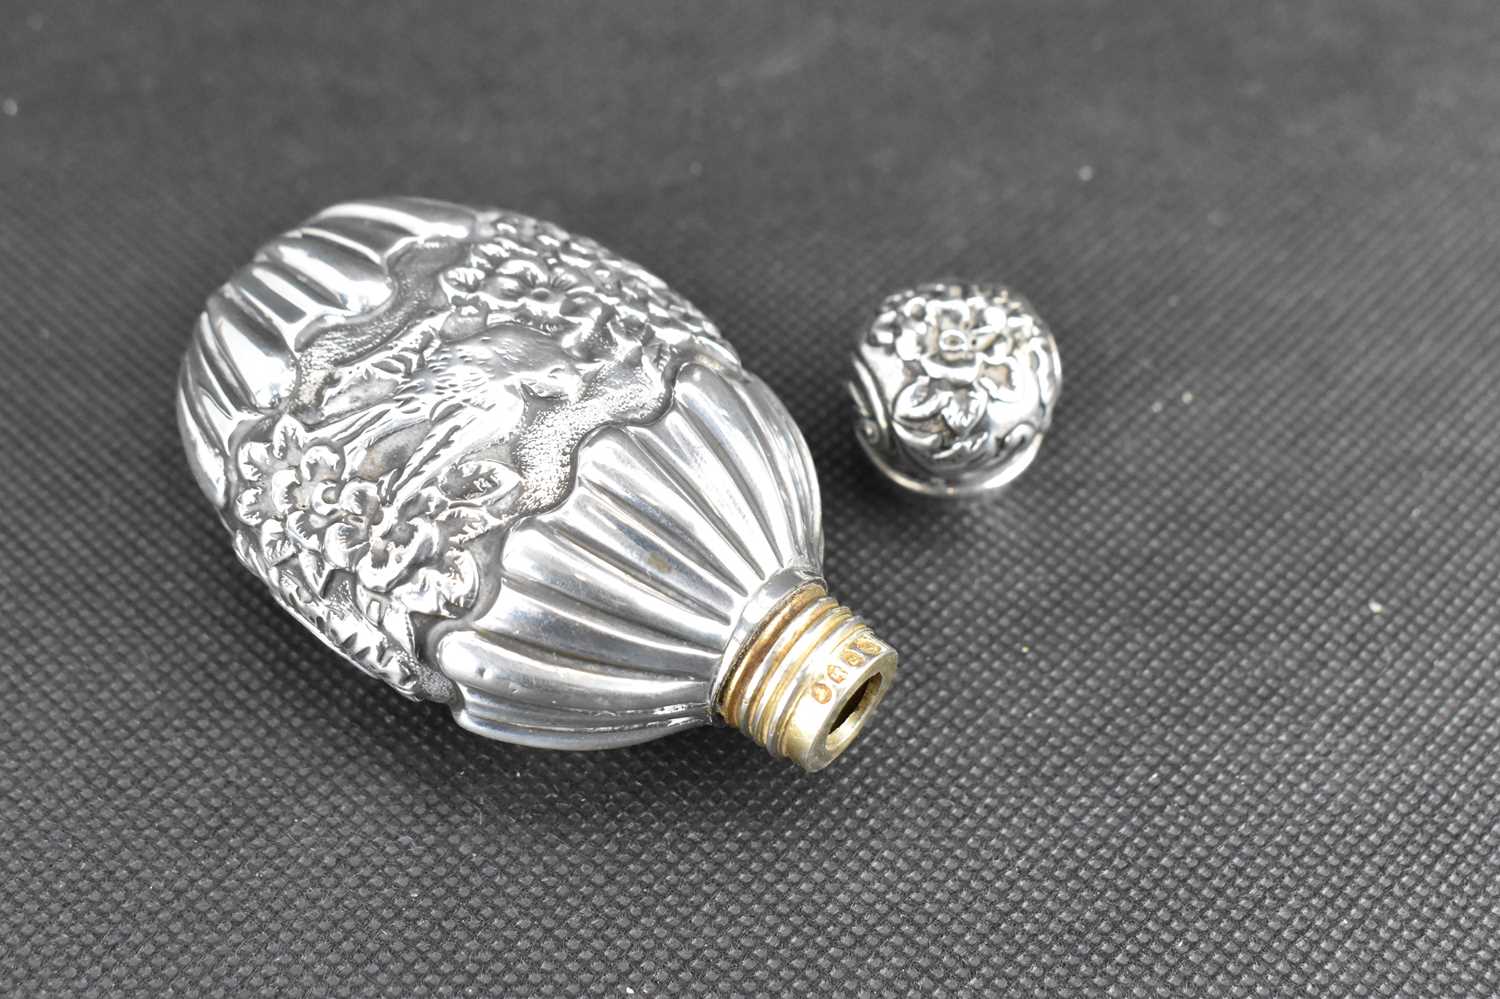 A late 19th/early 20th century hallmarked silver perfume bottle of ovoid form with central band - Image 3 of 5